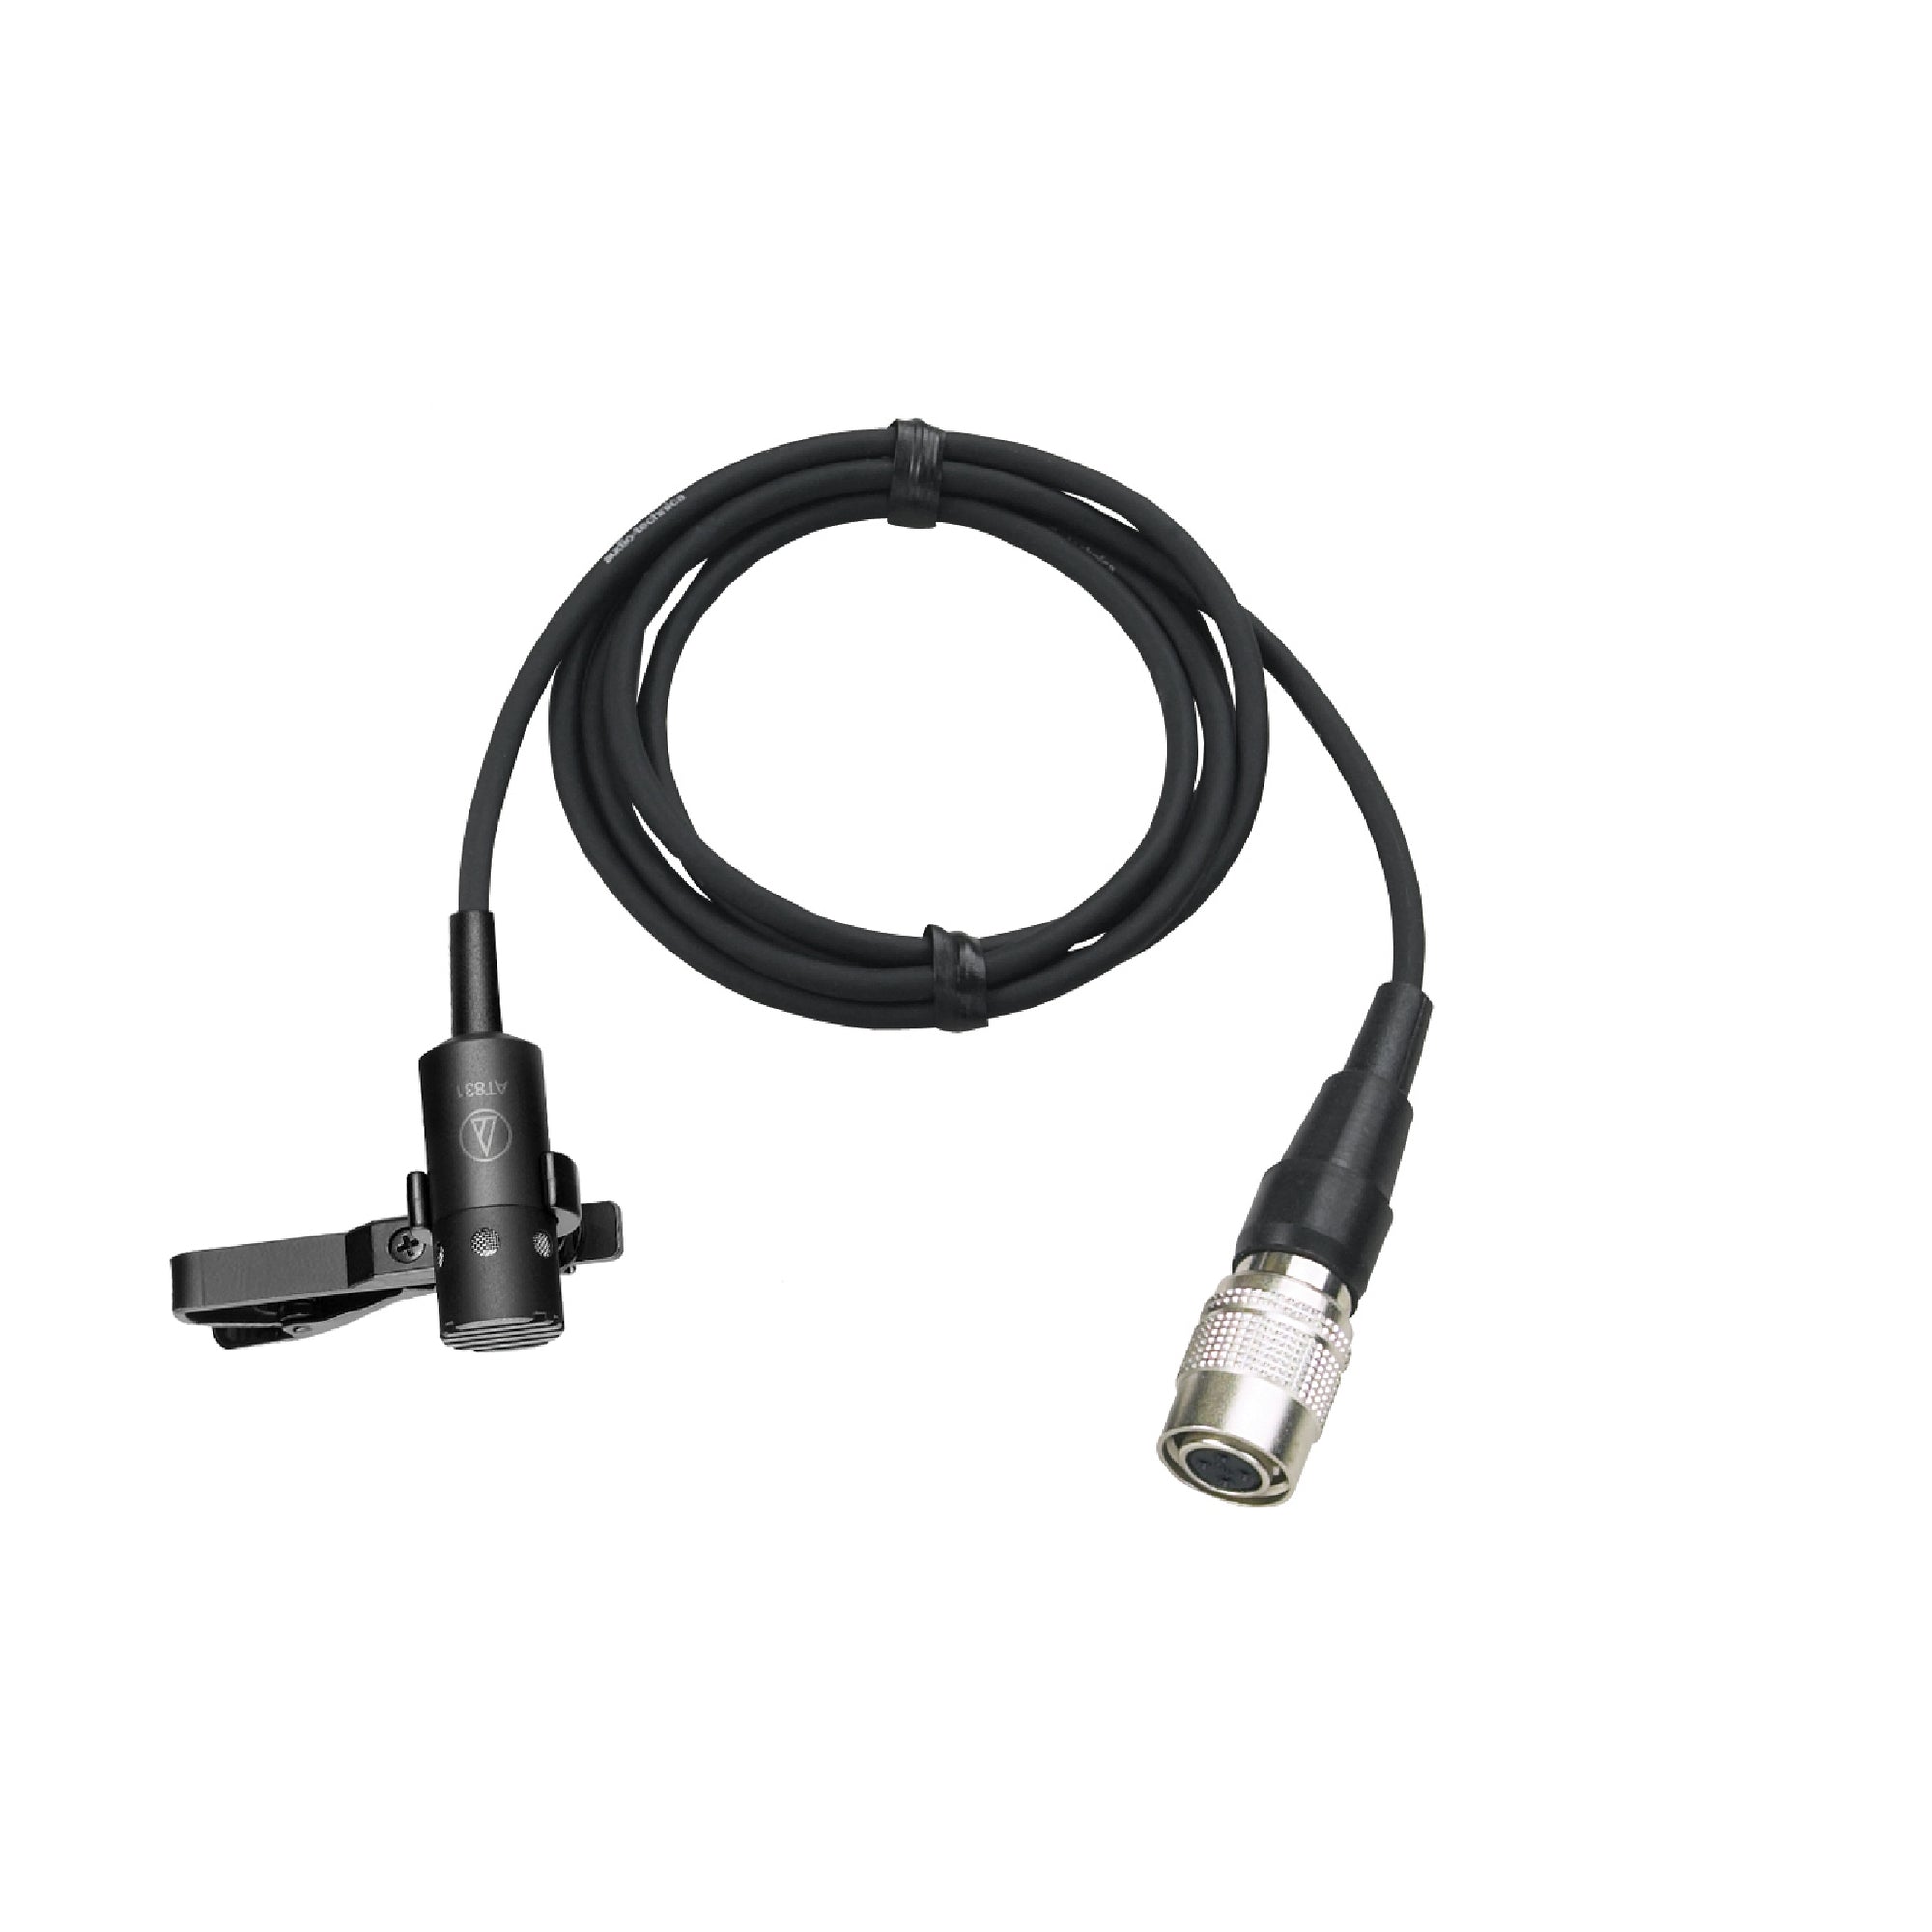 Audio Technica AT831cW Cardioid Lavalier Microphone